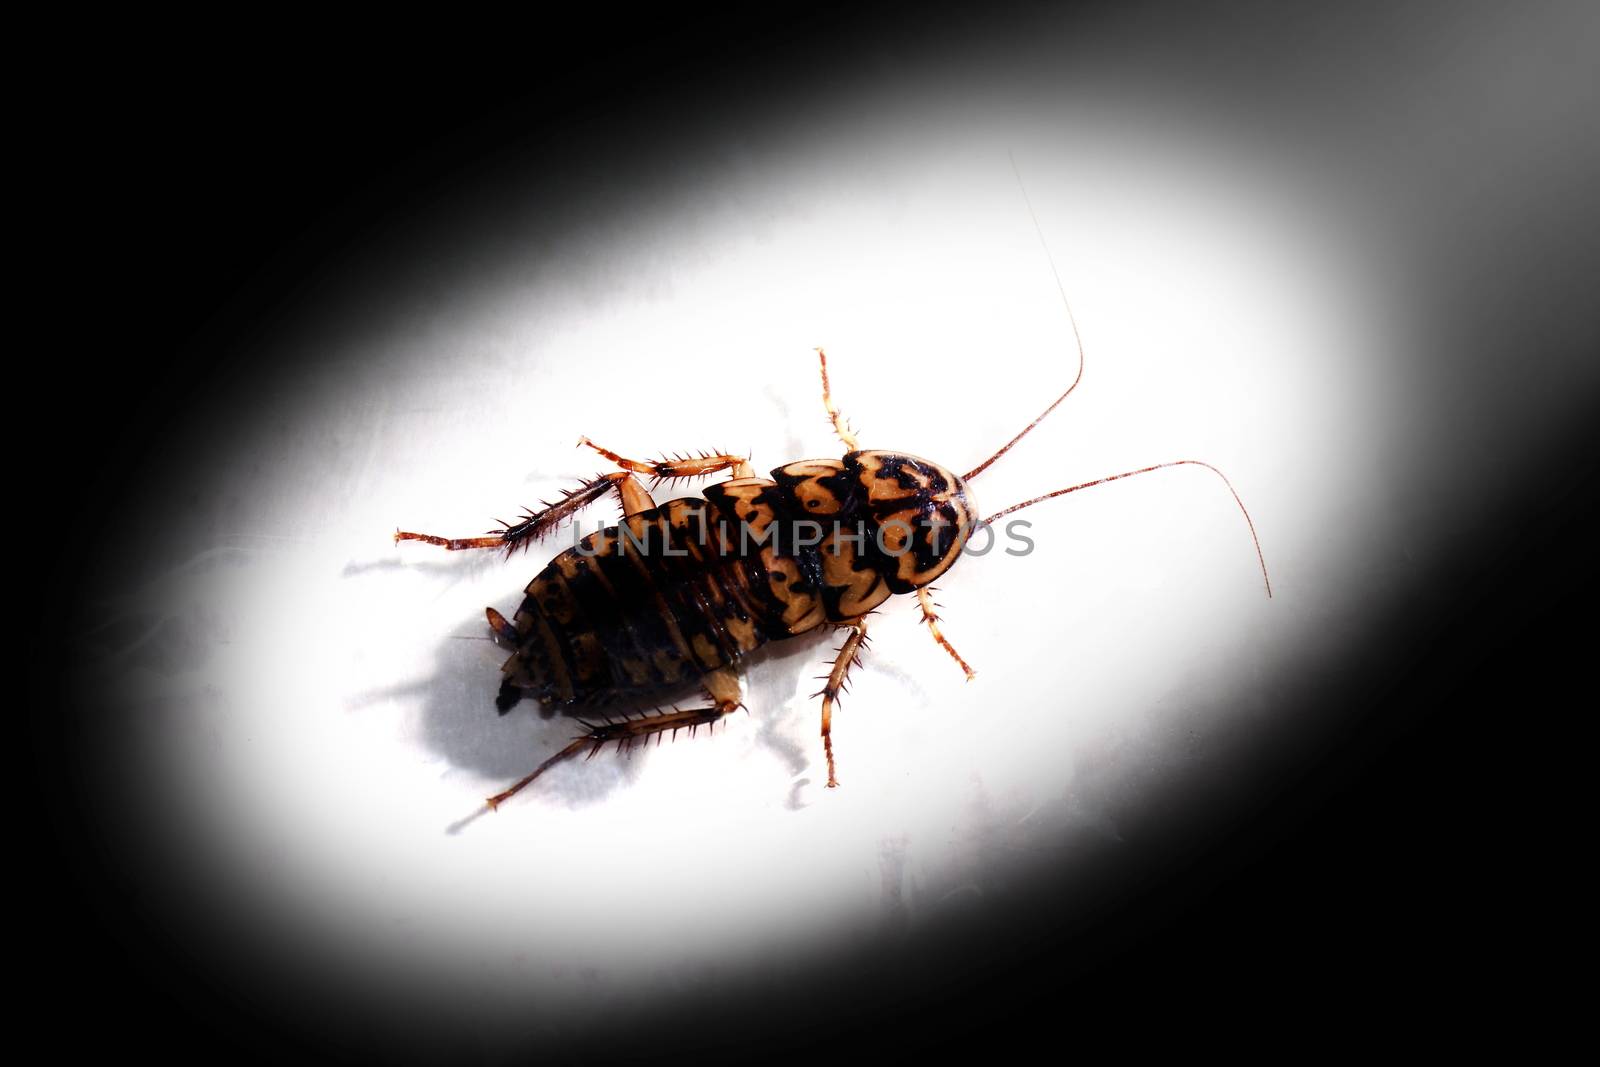 Cockroach, Cockroaches, Roach in the light on dark black shadow background by cgdeaw